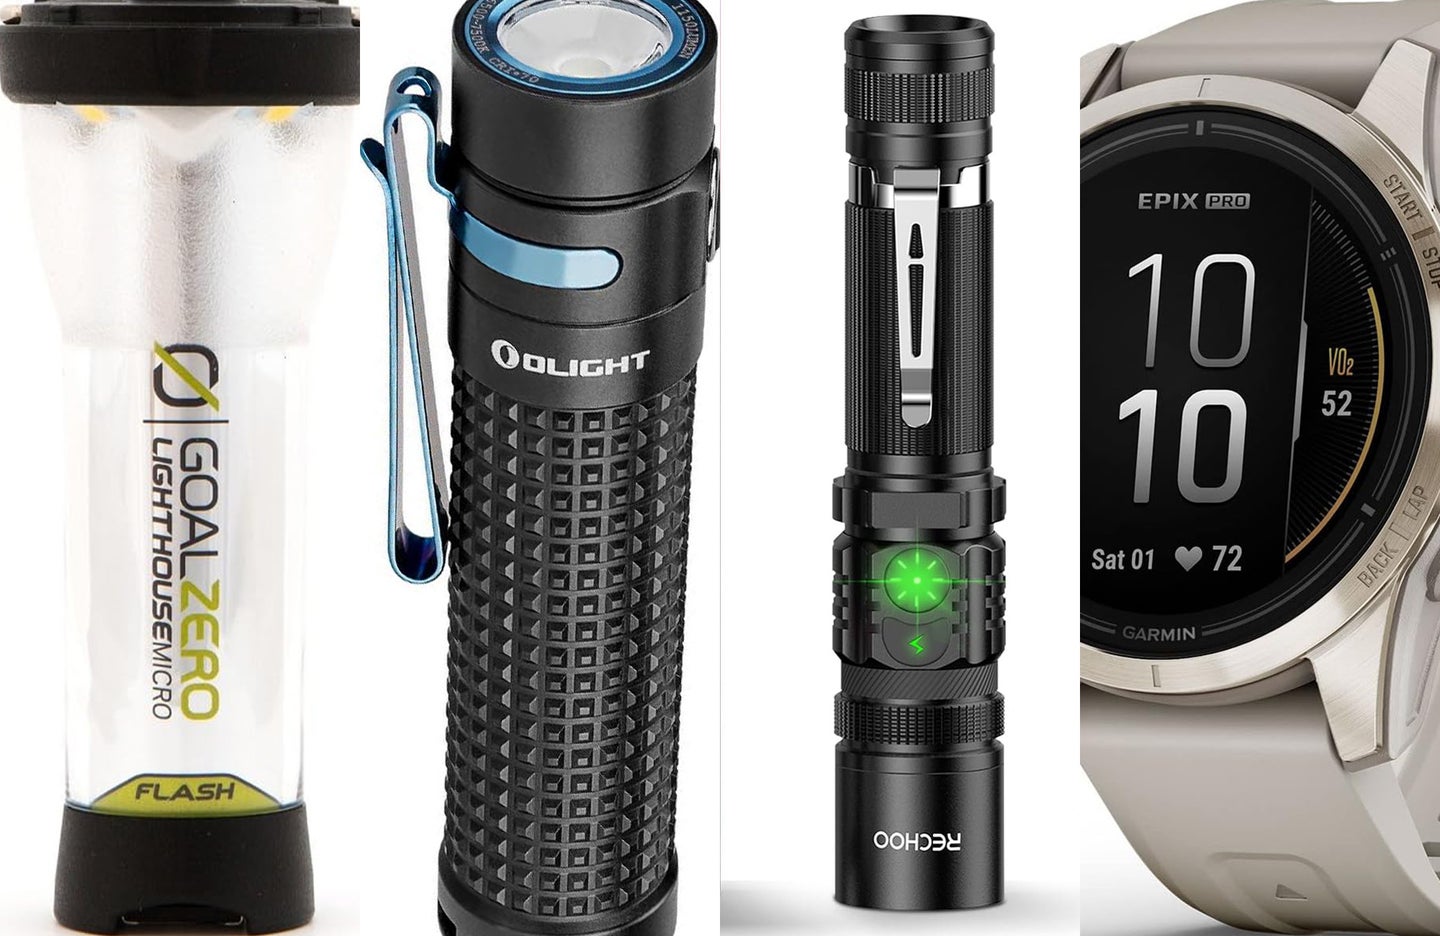 Four of the best rechargeable flashlights are sliced together against a white background.